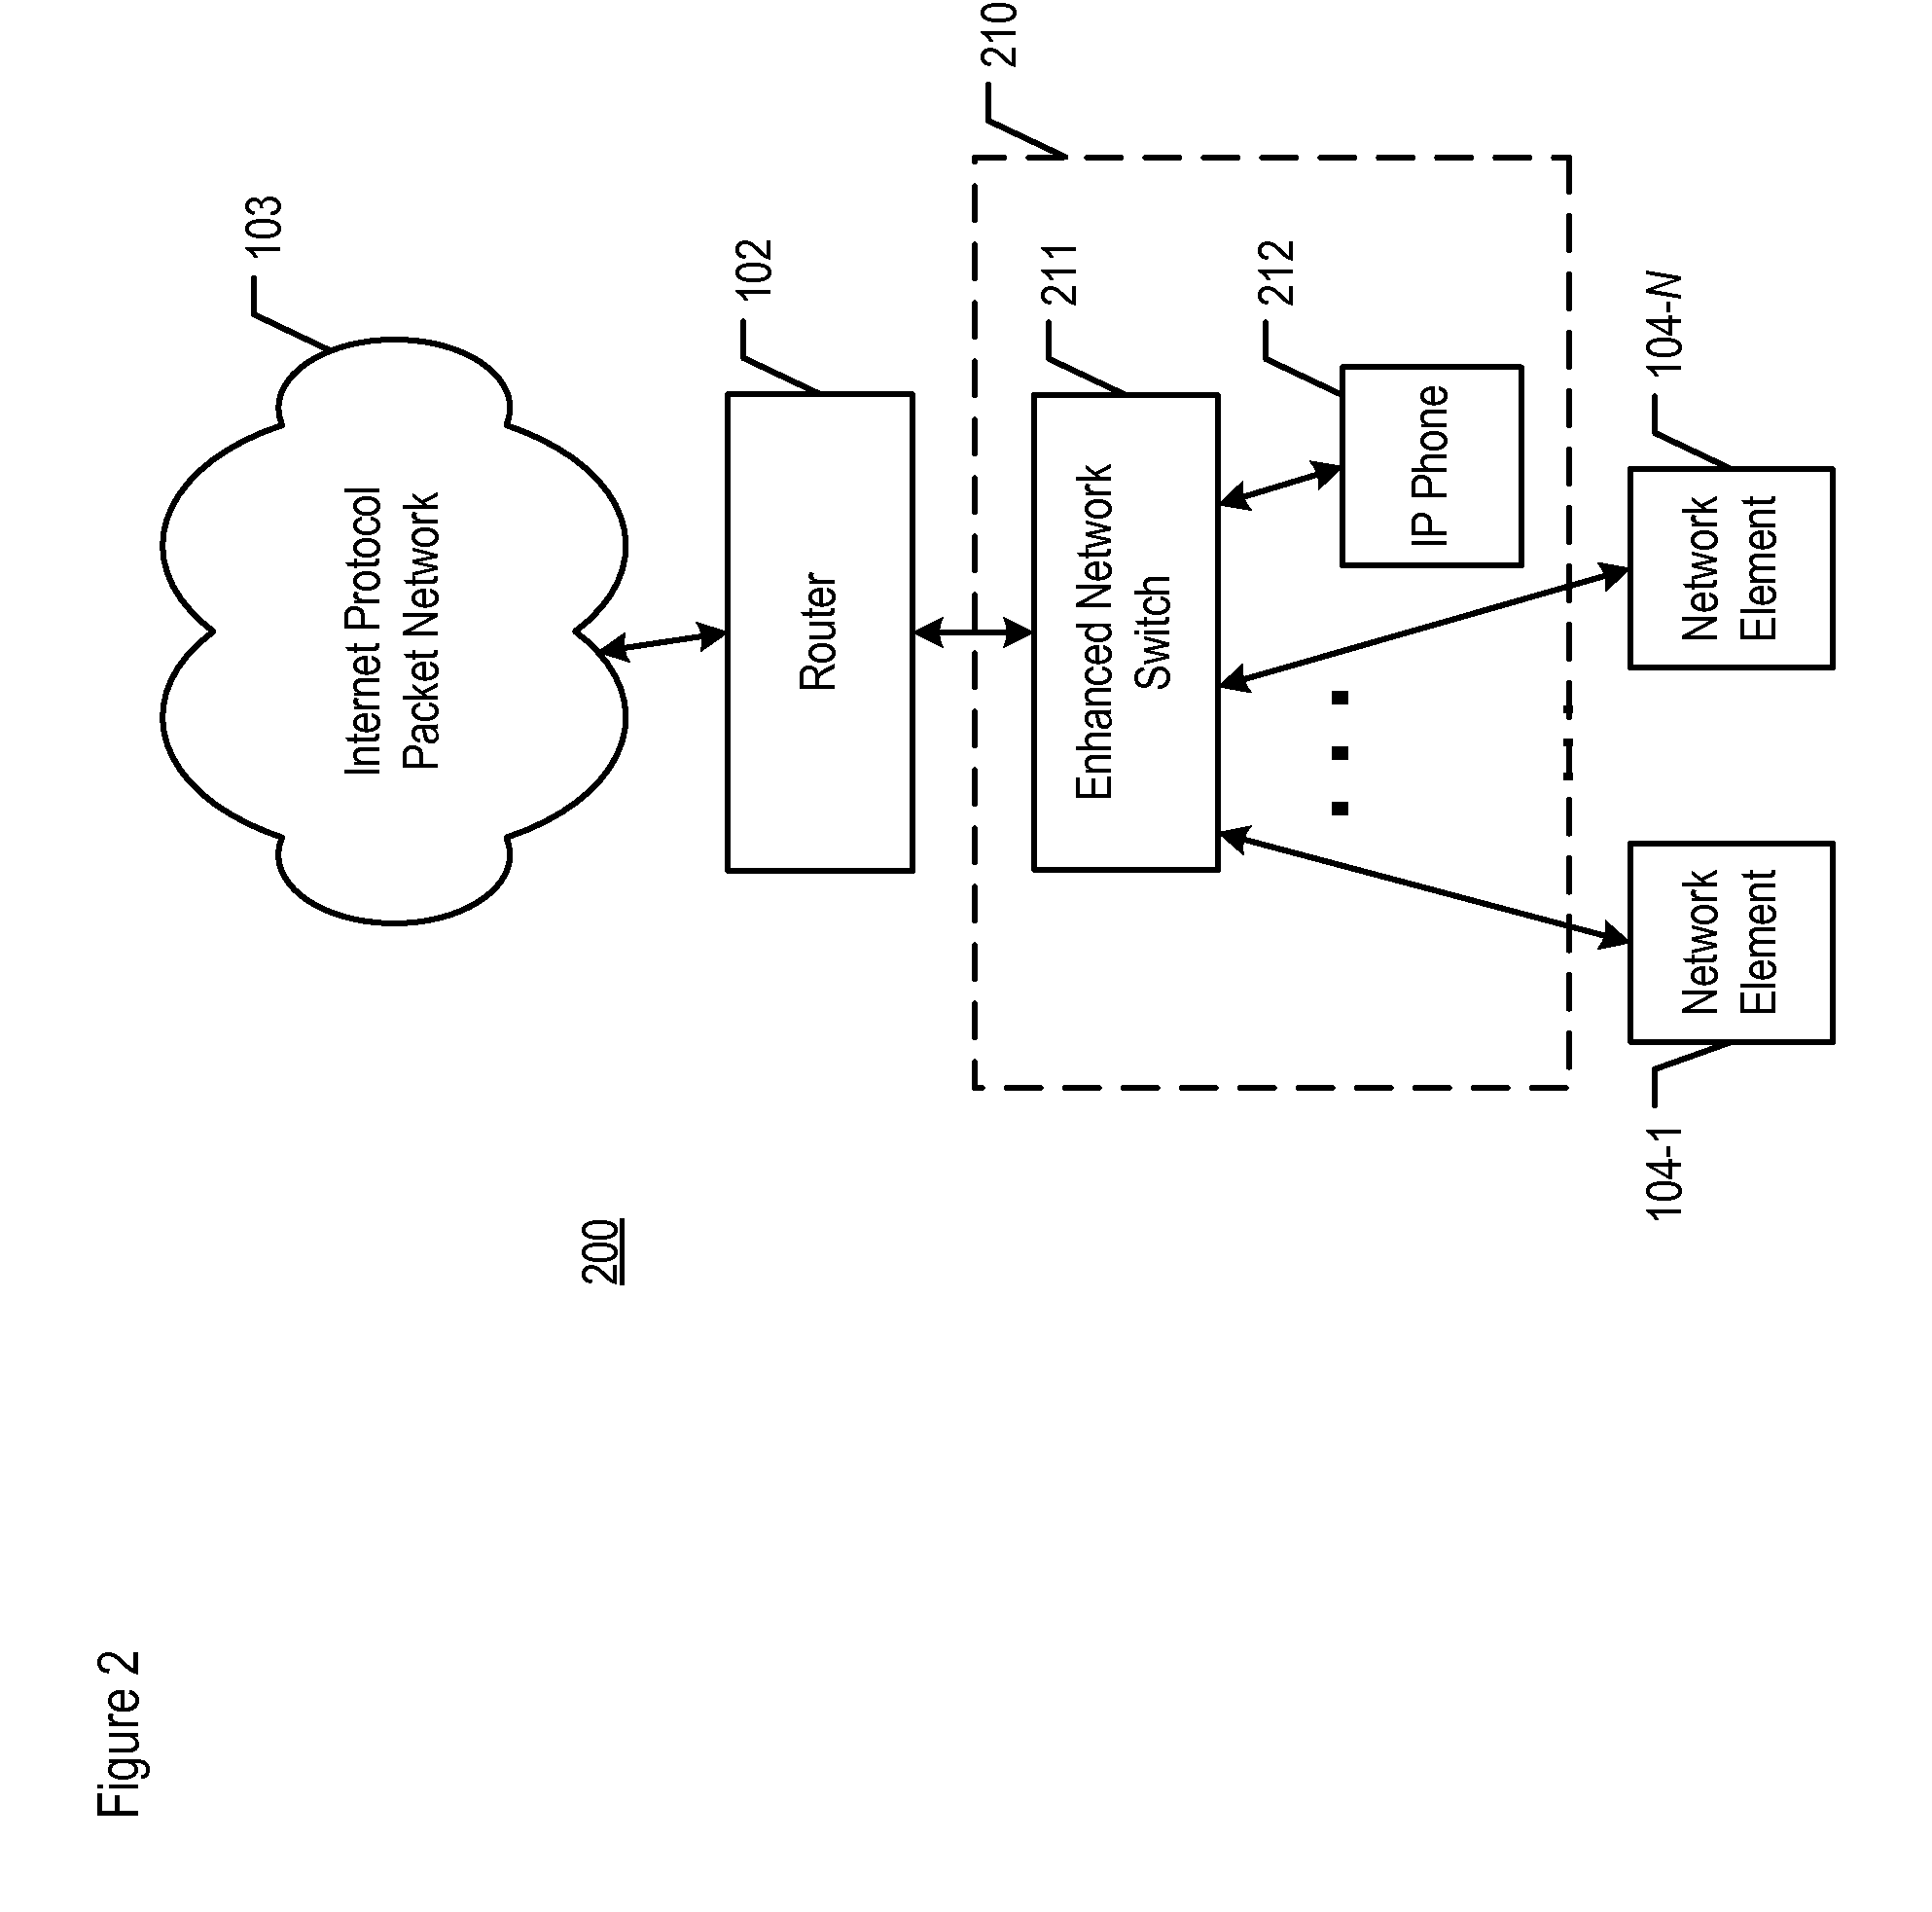 Network switch that is optimized for a telephony-capable endpoint